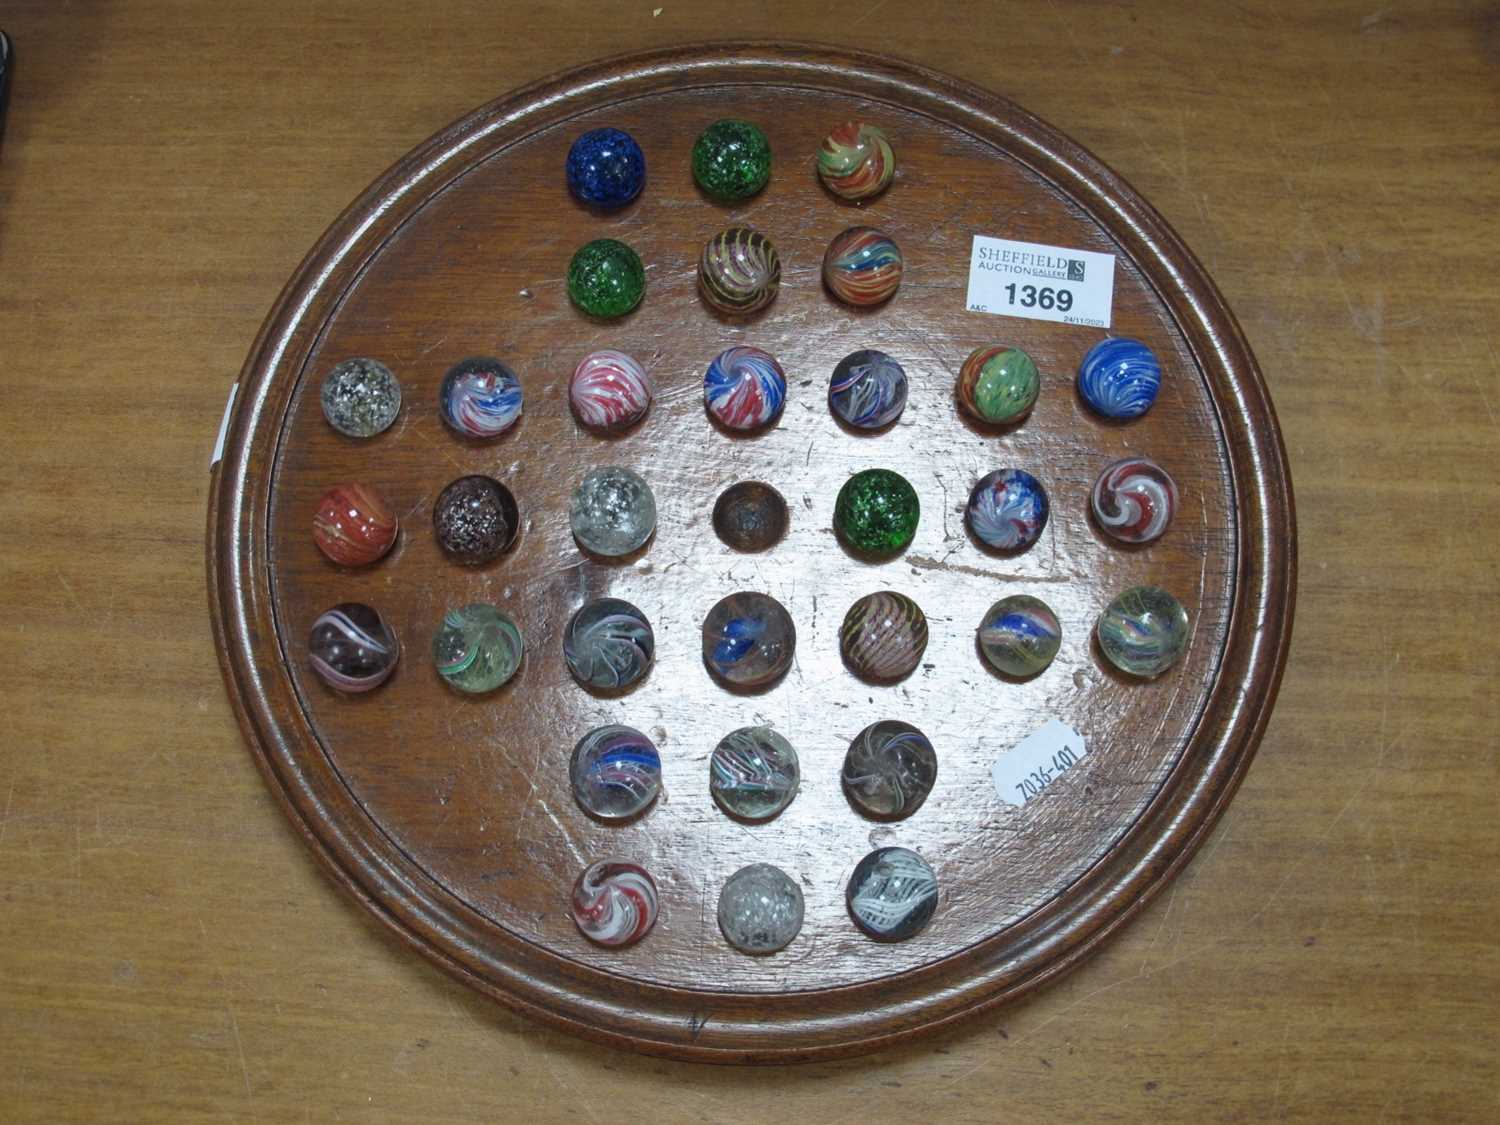 A solitaire board complete with Victorian marbles (32) dimensions board 27cm and all marbles about - Image 10 of 11